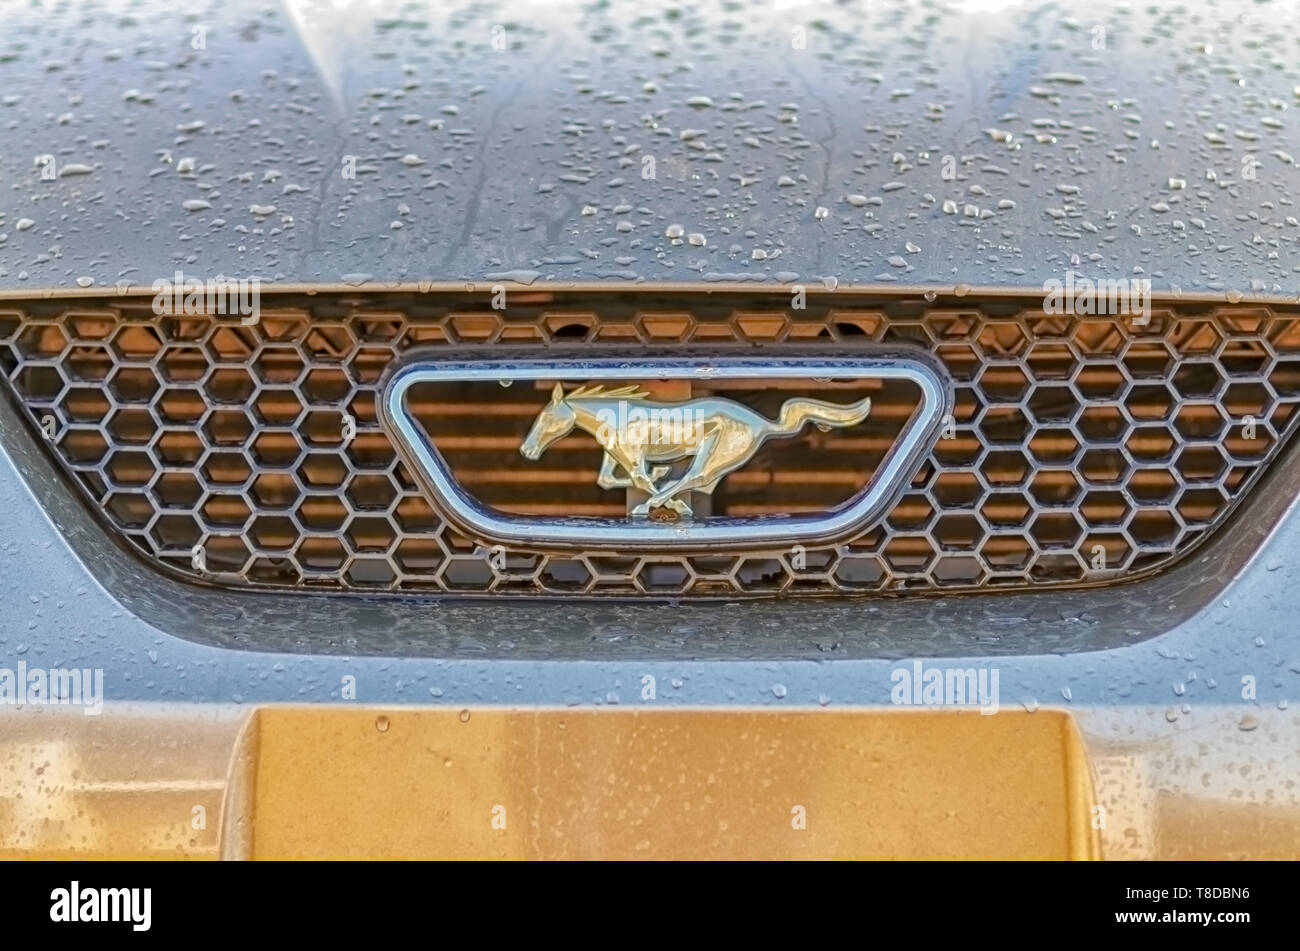 Rain water dripping off a Ford Mustang after a summer storm. The photograph also shows the Mustang radiator grille pony emblem. Stock Photo